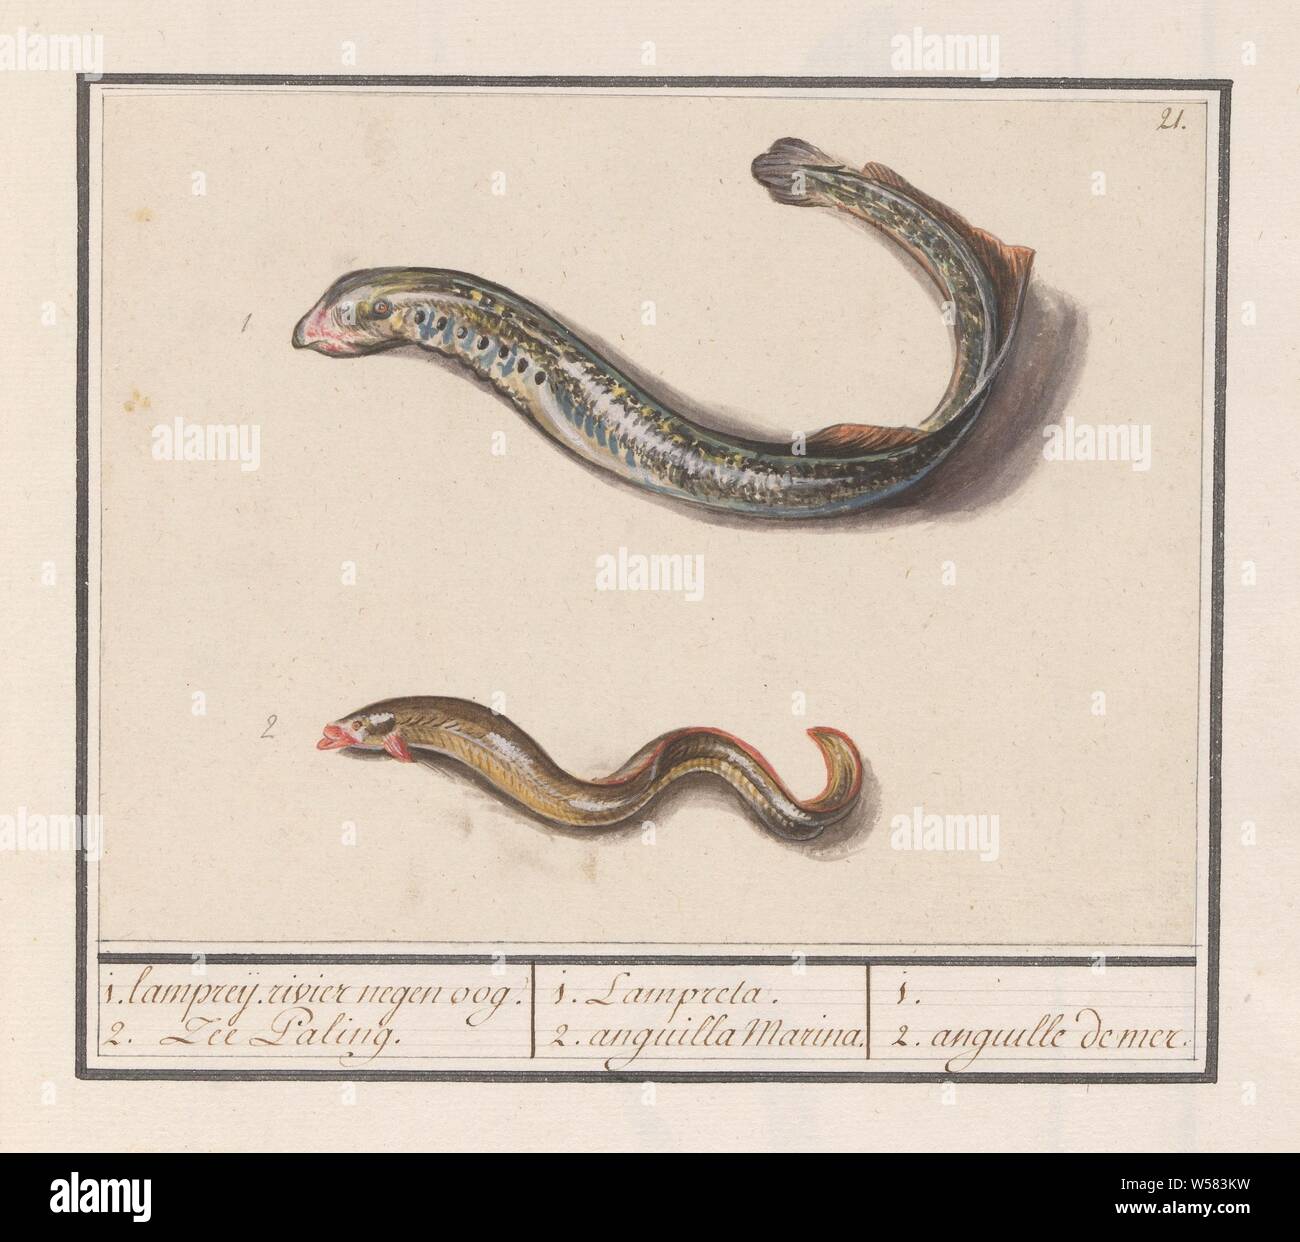 River puncture (Lampetra fluviatilis) and sea eel (Congridae), 1. lampreij. river nine eye. 2. Sea Eel. / 1. Lampreta. 2. Anguilla Marina. / 1. 2. anguille de mer. (title on object), River puncture and sea eel. Numbered top right: 21. Part of the sixth album with drawings of fish, shells and insects. Sixth of twelve albums with drawings of animals, birds and plants known around 1600, commissioned by Emperor Rudolf II. With explanations in Dutch, Latin and French, eels: lamprey, eels: eel, Anselmus Boetius de Boodt, 1596 - 1610, paper, pencil, chalk, watercolor (paint), deck paint, brush, h 145 Stock Photo